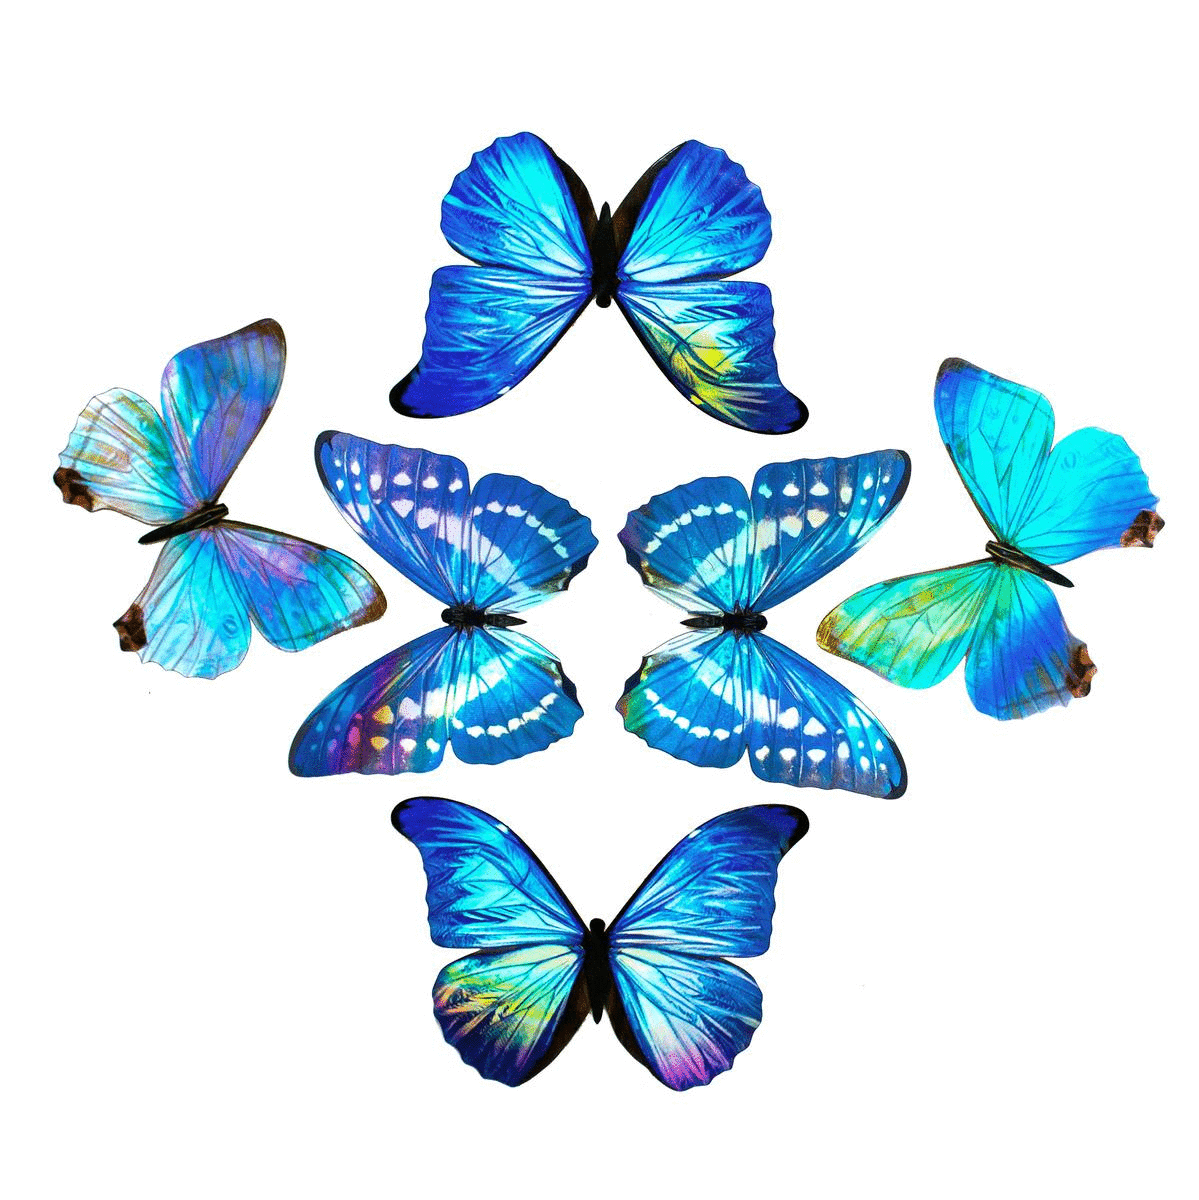 Holographic Morpho Butterfly Sticker Pack - Artist Discount